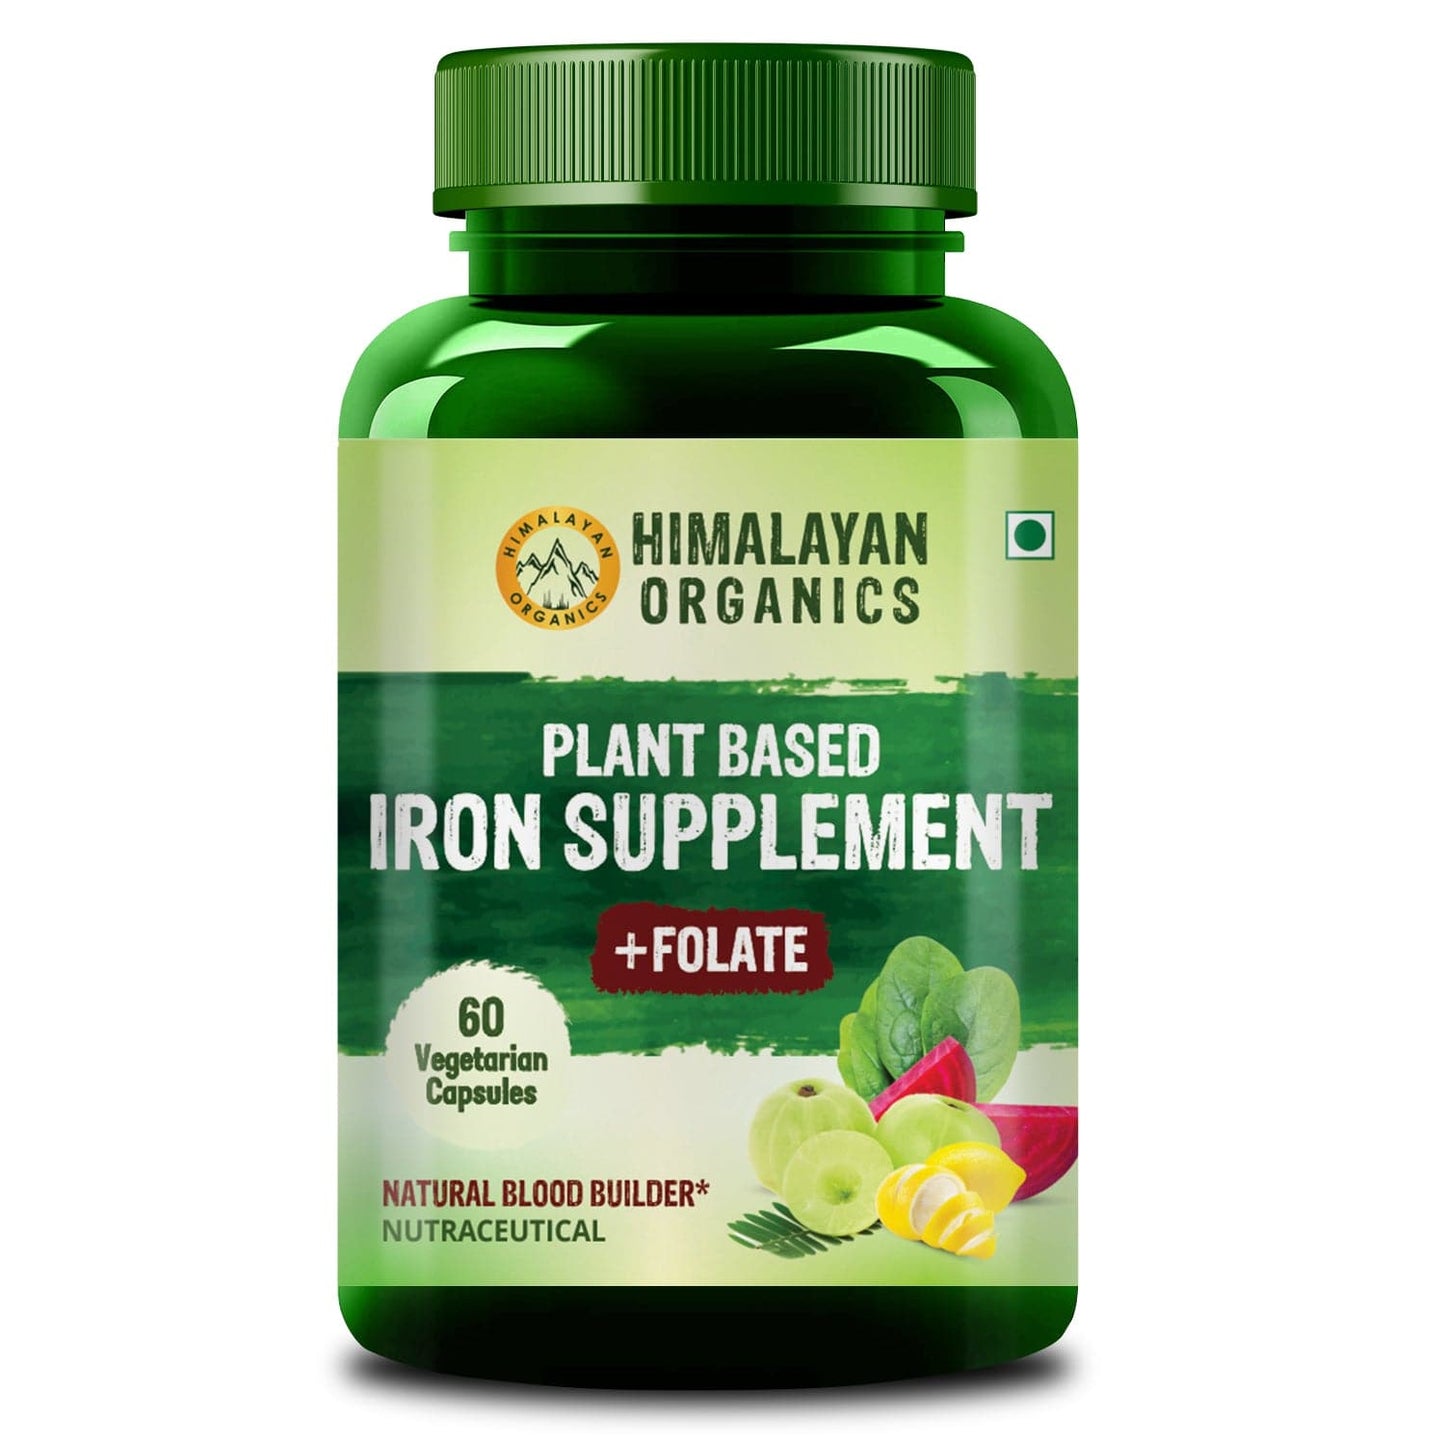 Himalayan Organics Plant Based Iron Supplement with Folate | Improved Hemoglobin & Oxygen Capacity | Stomach Friendly | Boost Energy - 60 Veg Capsules